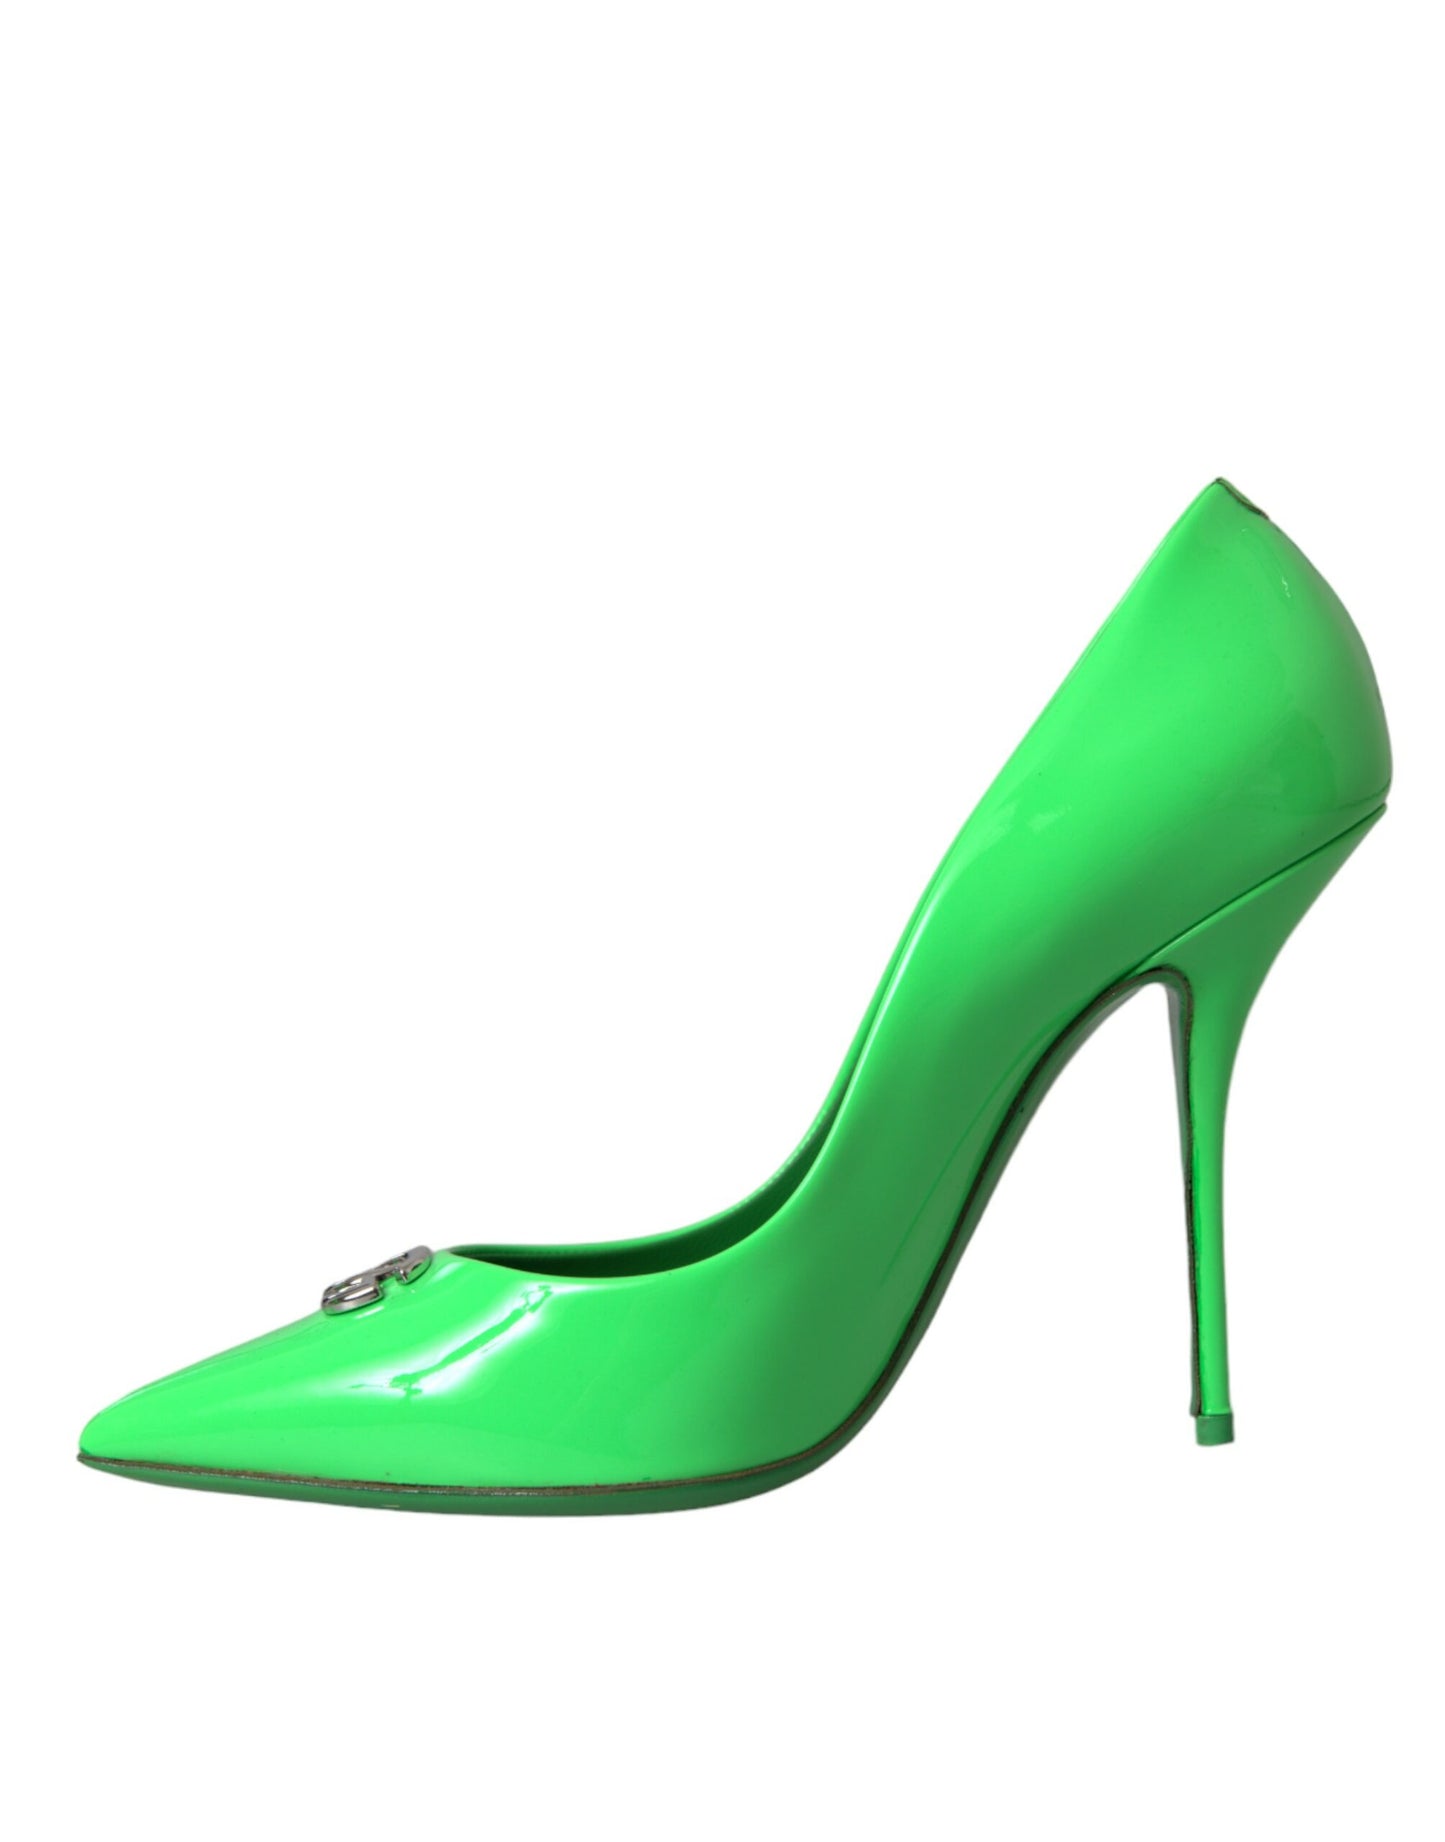 Neon Green Patent Leather Logo Pumps Shoes